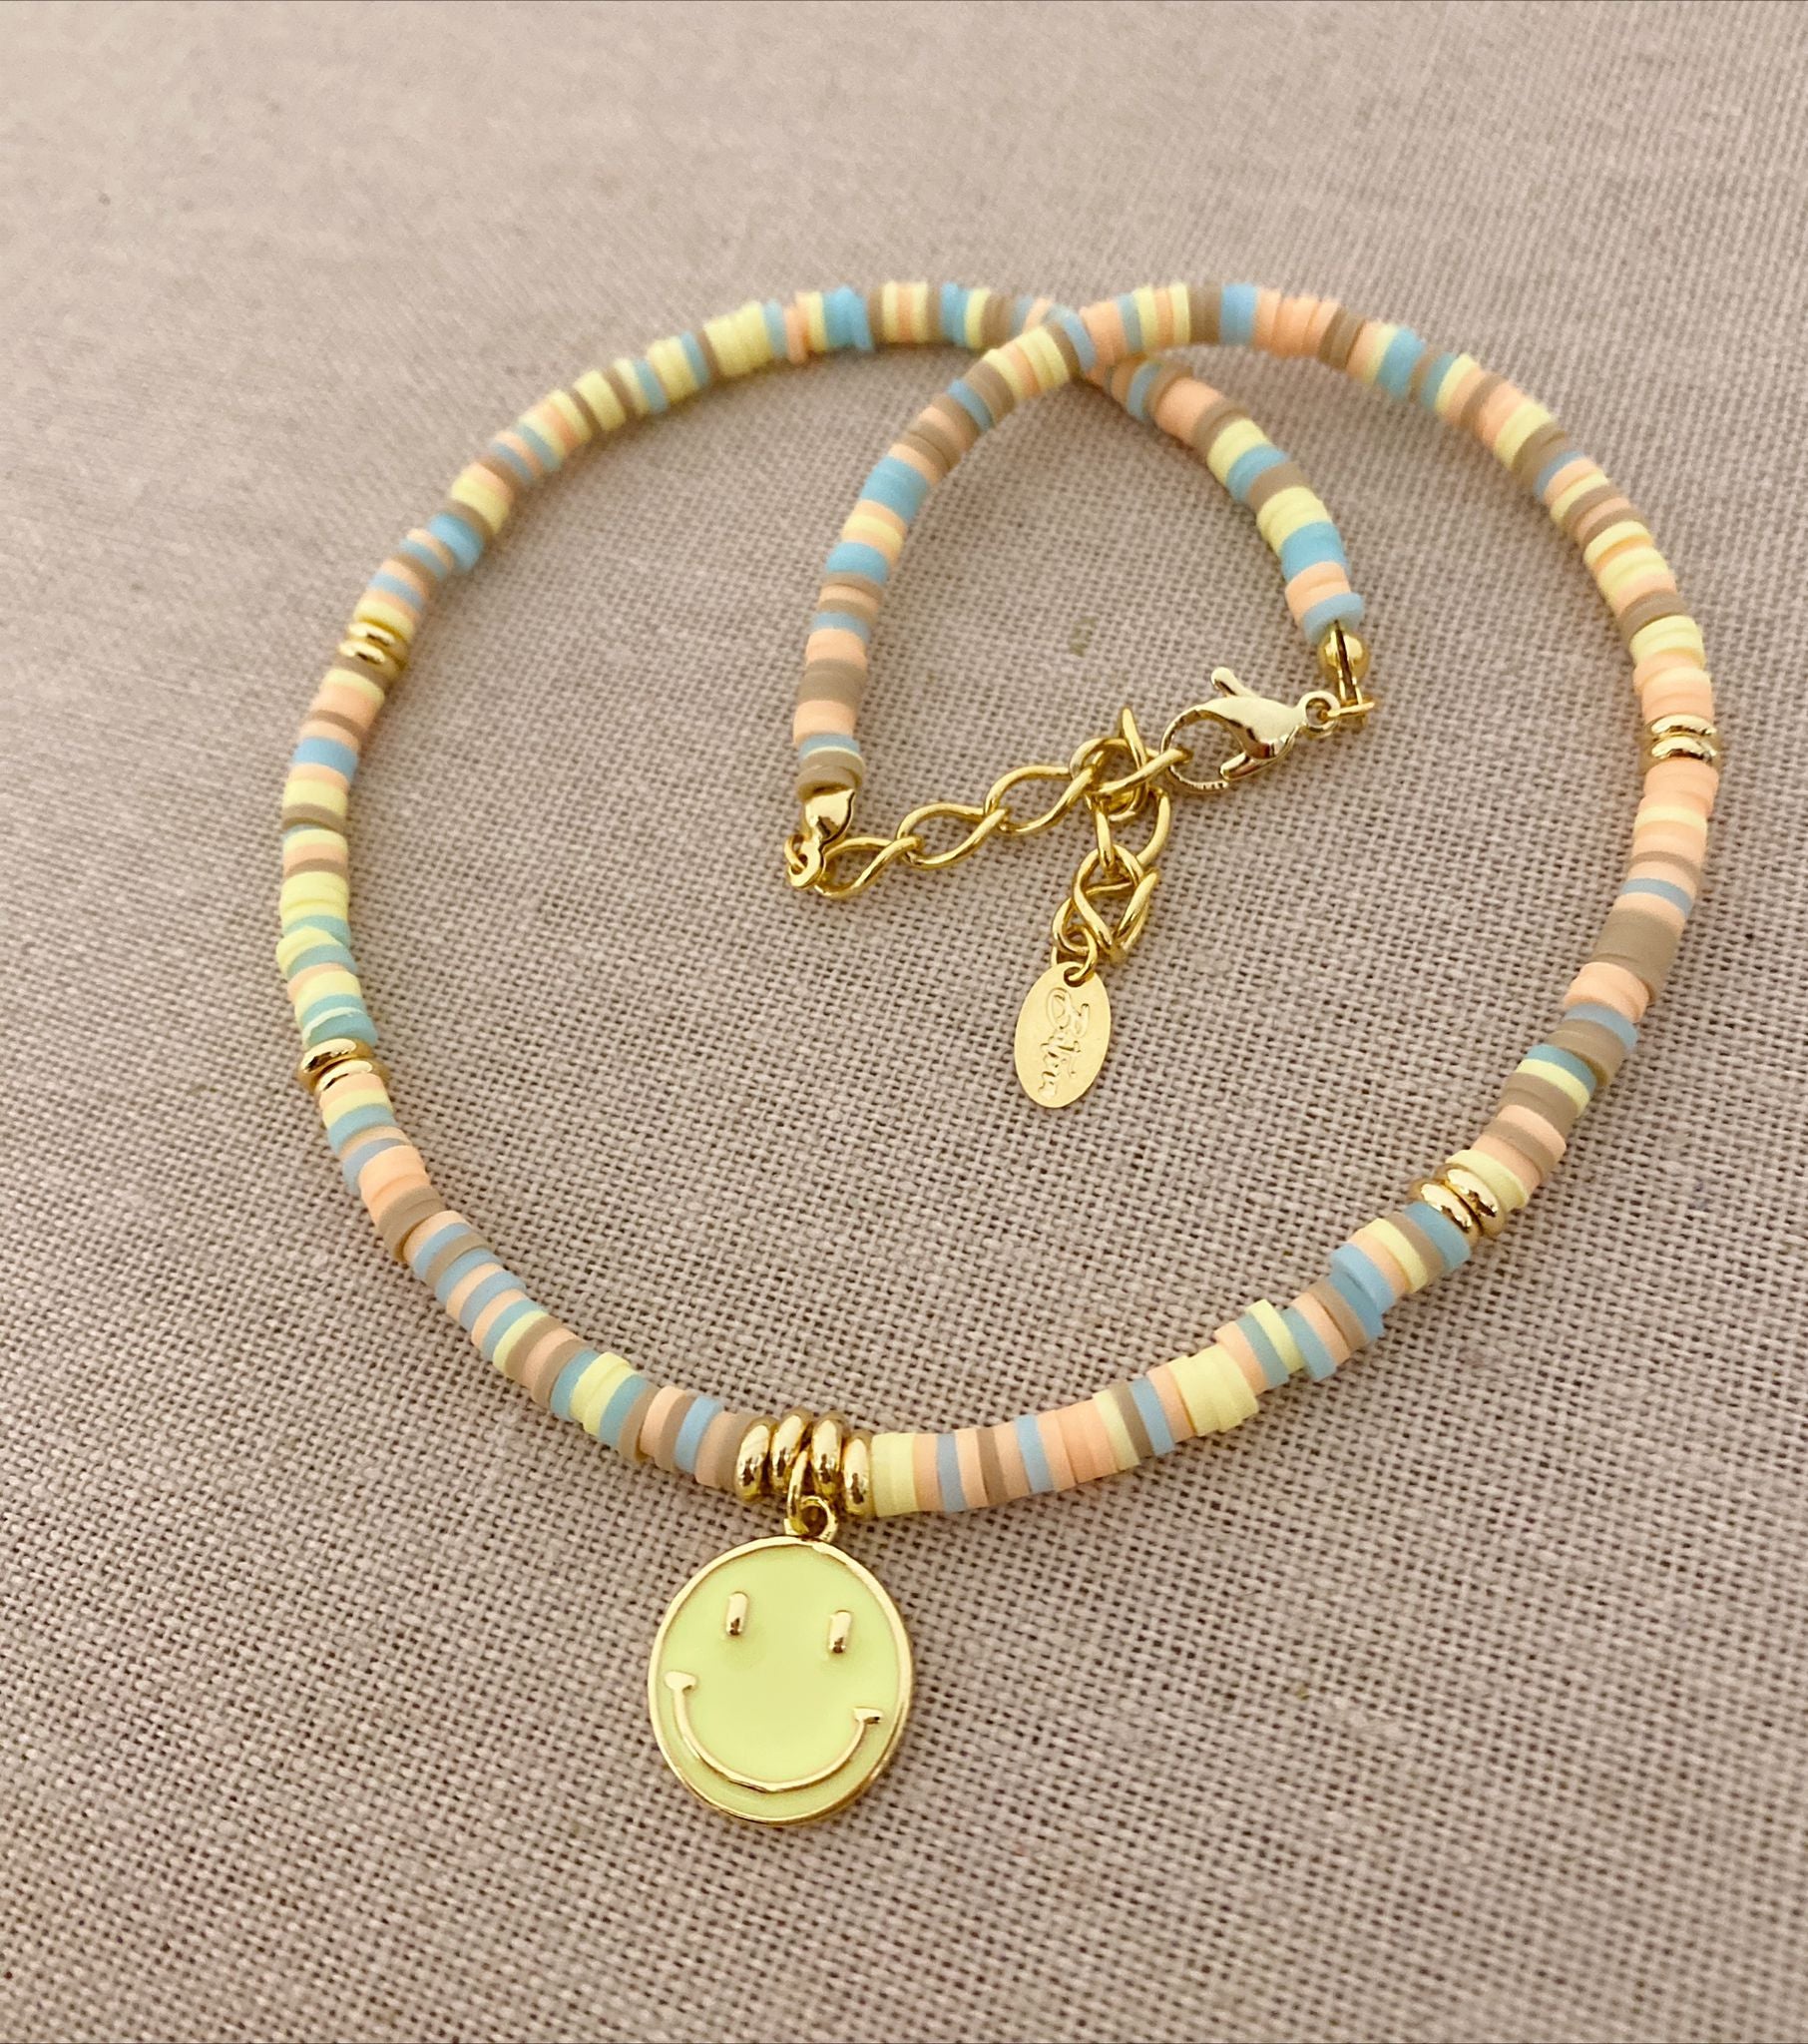 Style Surfer Necklace with Happy Face Charm